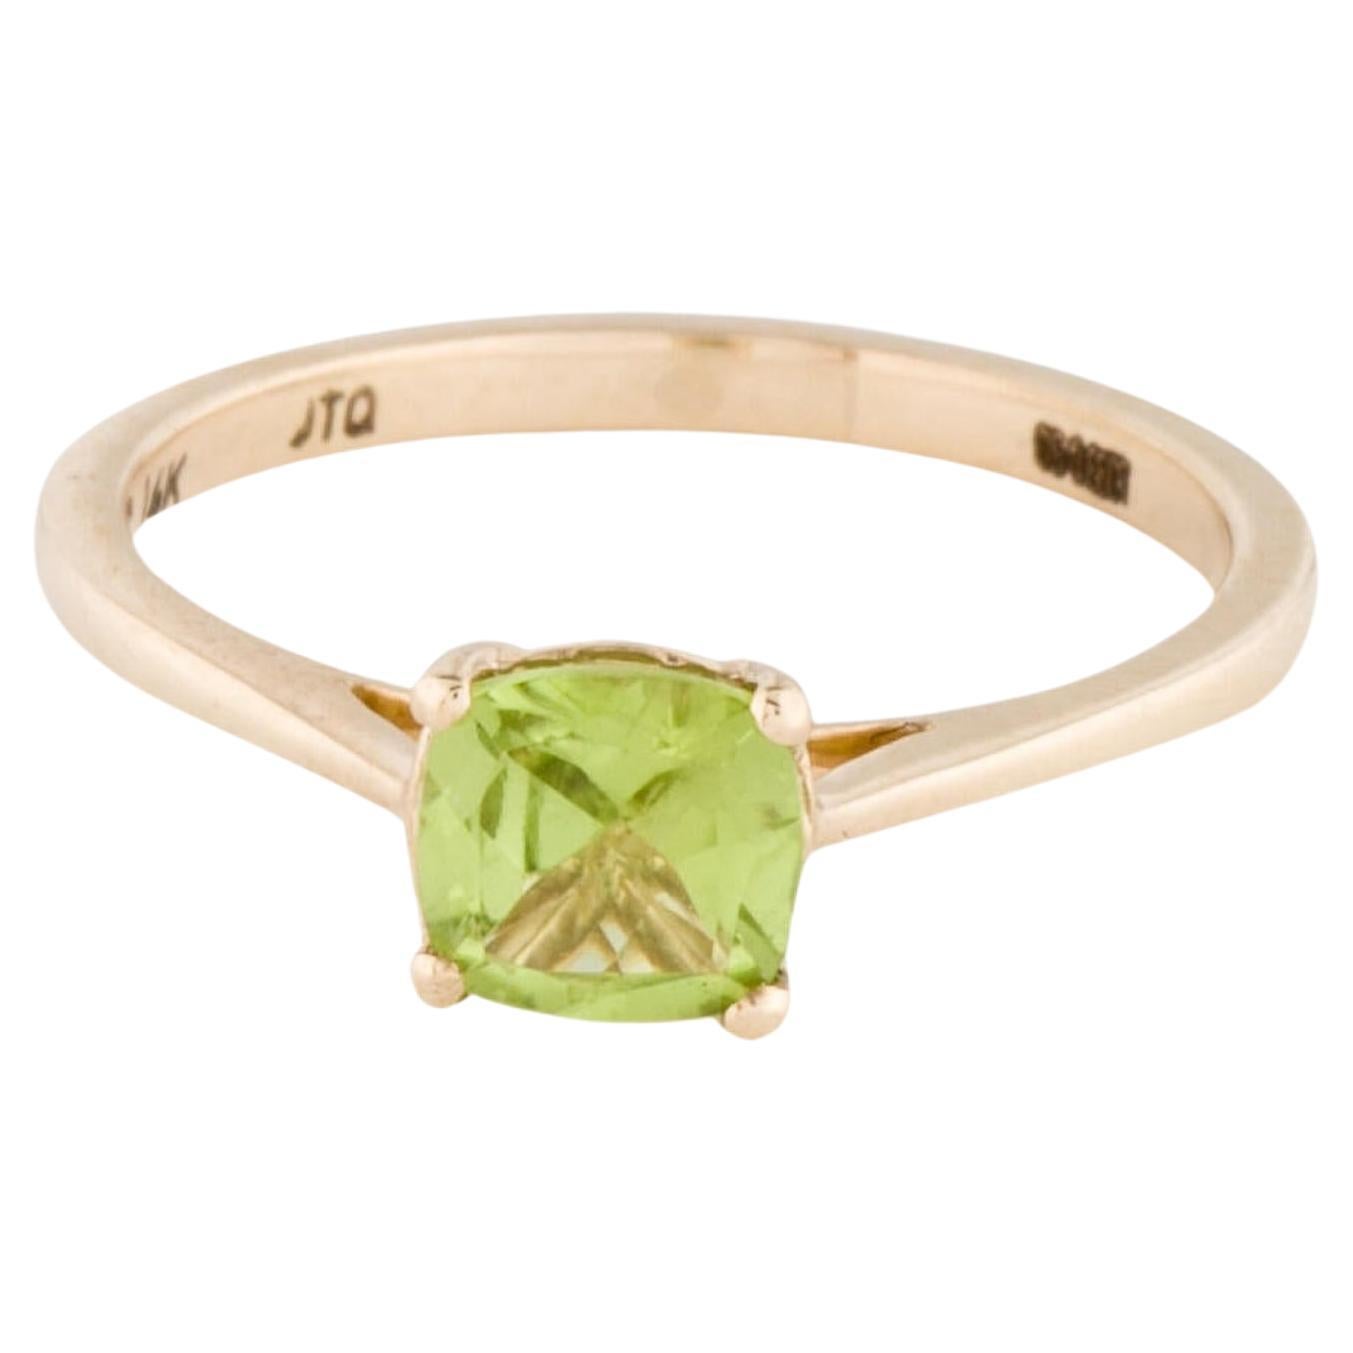 Exquisite 14K Peridot Solitaire Cocktail Ring - Size 6.75 - Elegant & Timeless For Sale